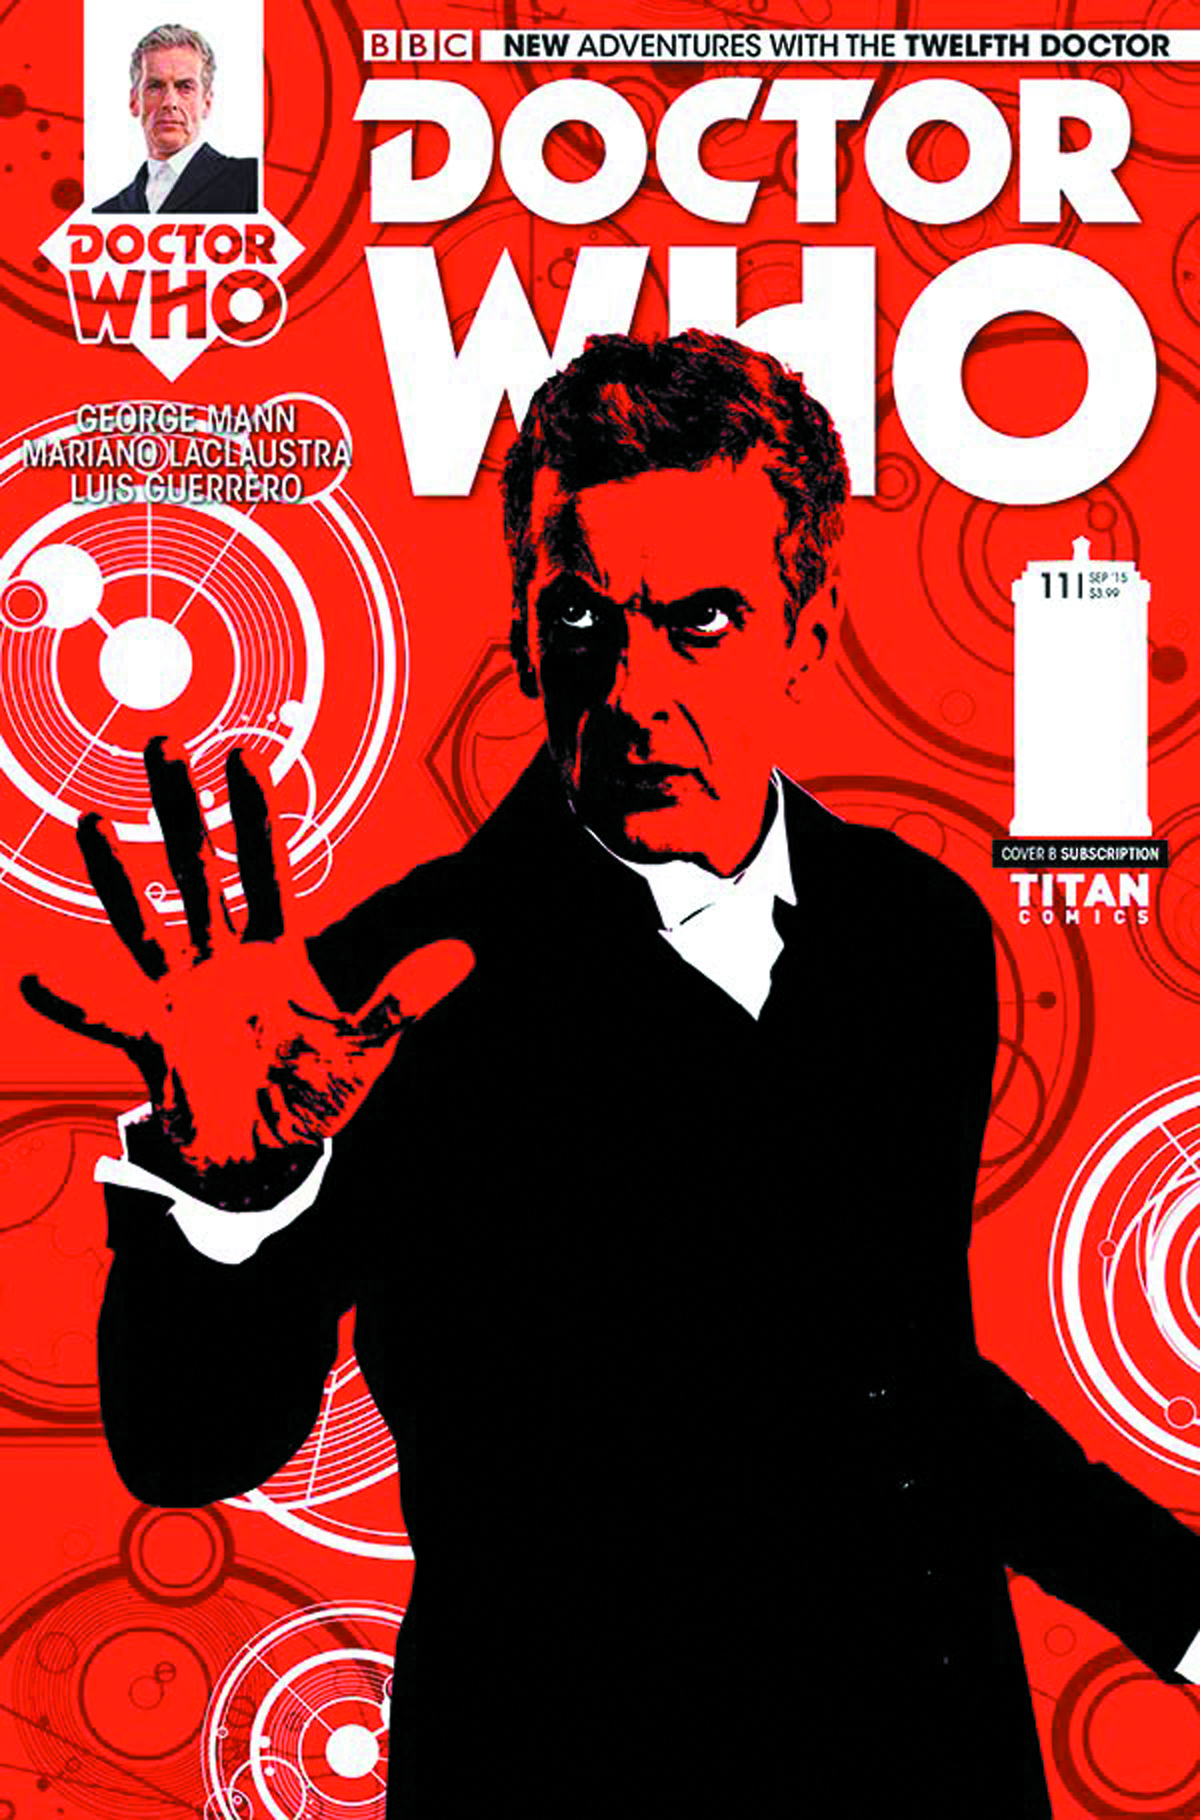 DOCTOR WHO 12TH #11 SUBSCRIPTION PHOTO